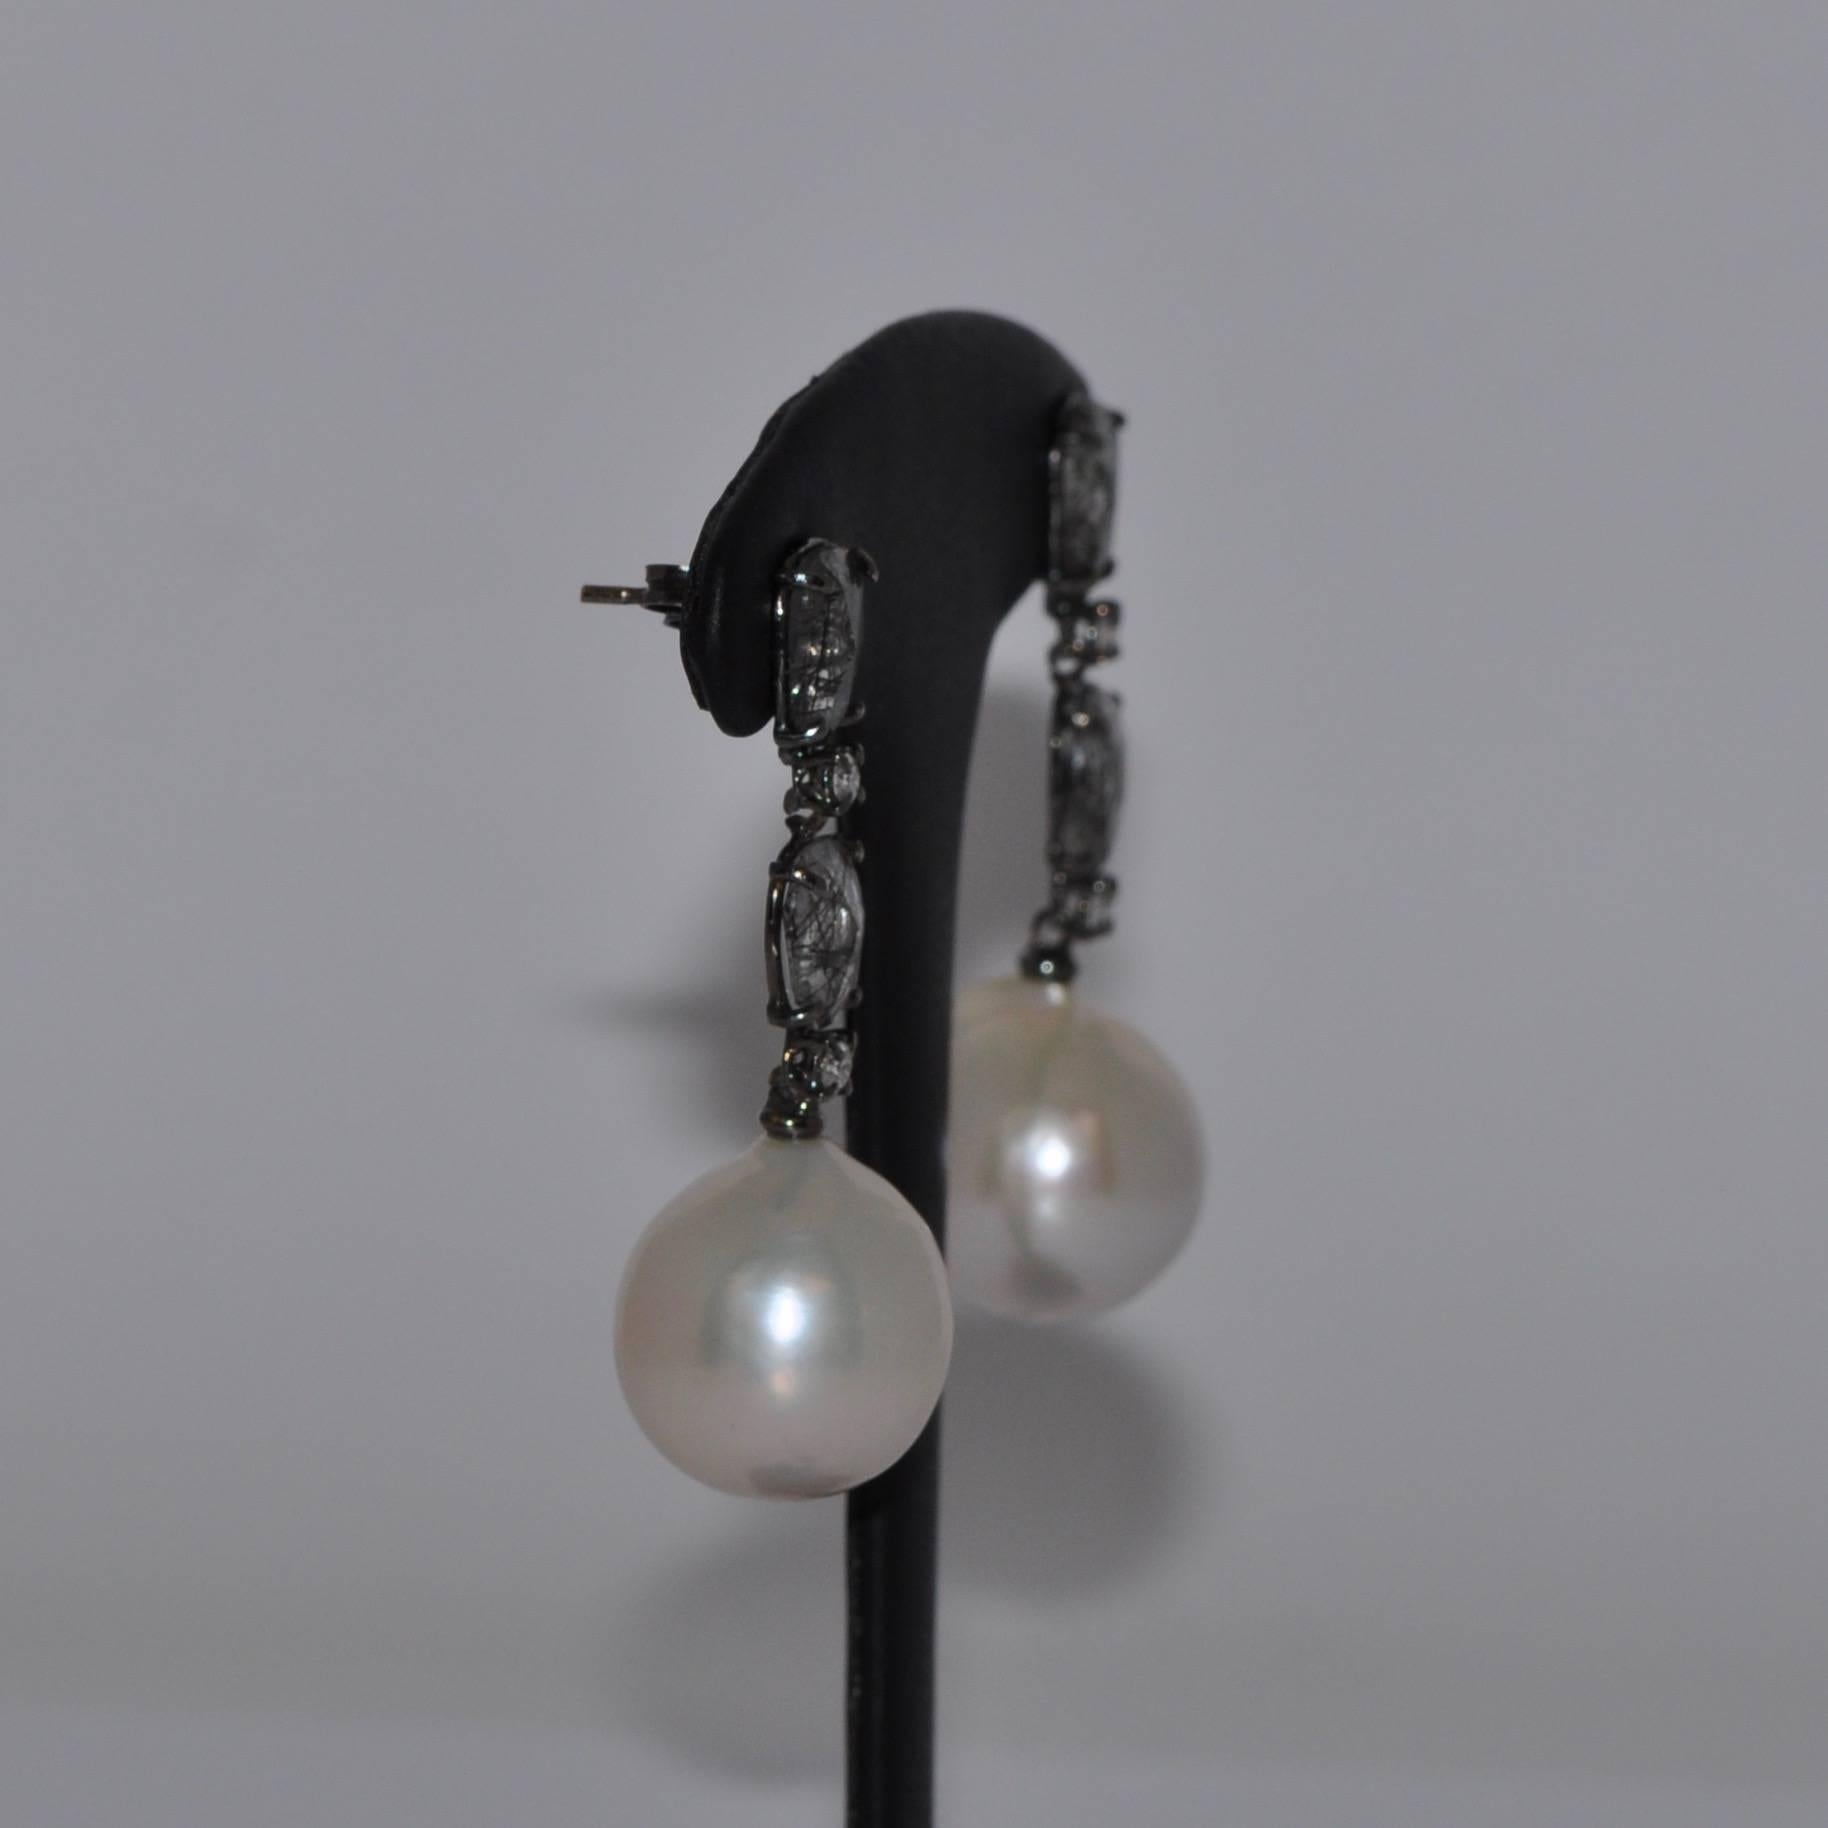 Discover this Tourmalines, Quartz and Cultured Pearls and Diamonds Black Gold Earrings.
Tourmalines
Quartz
Cultured Pearls 
White Diamonds 
Black Gold 18 Carat